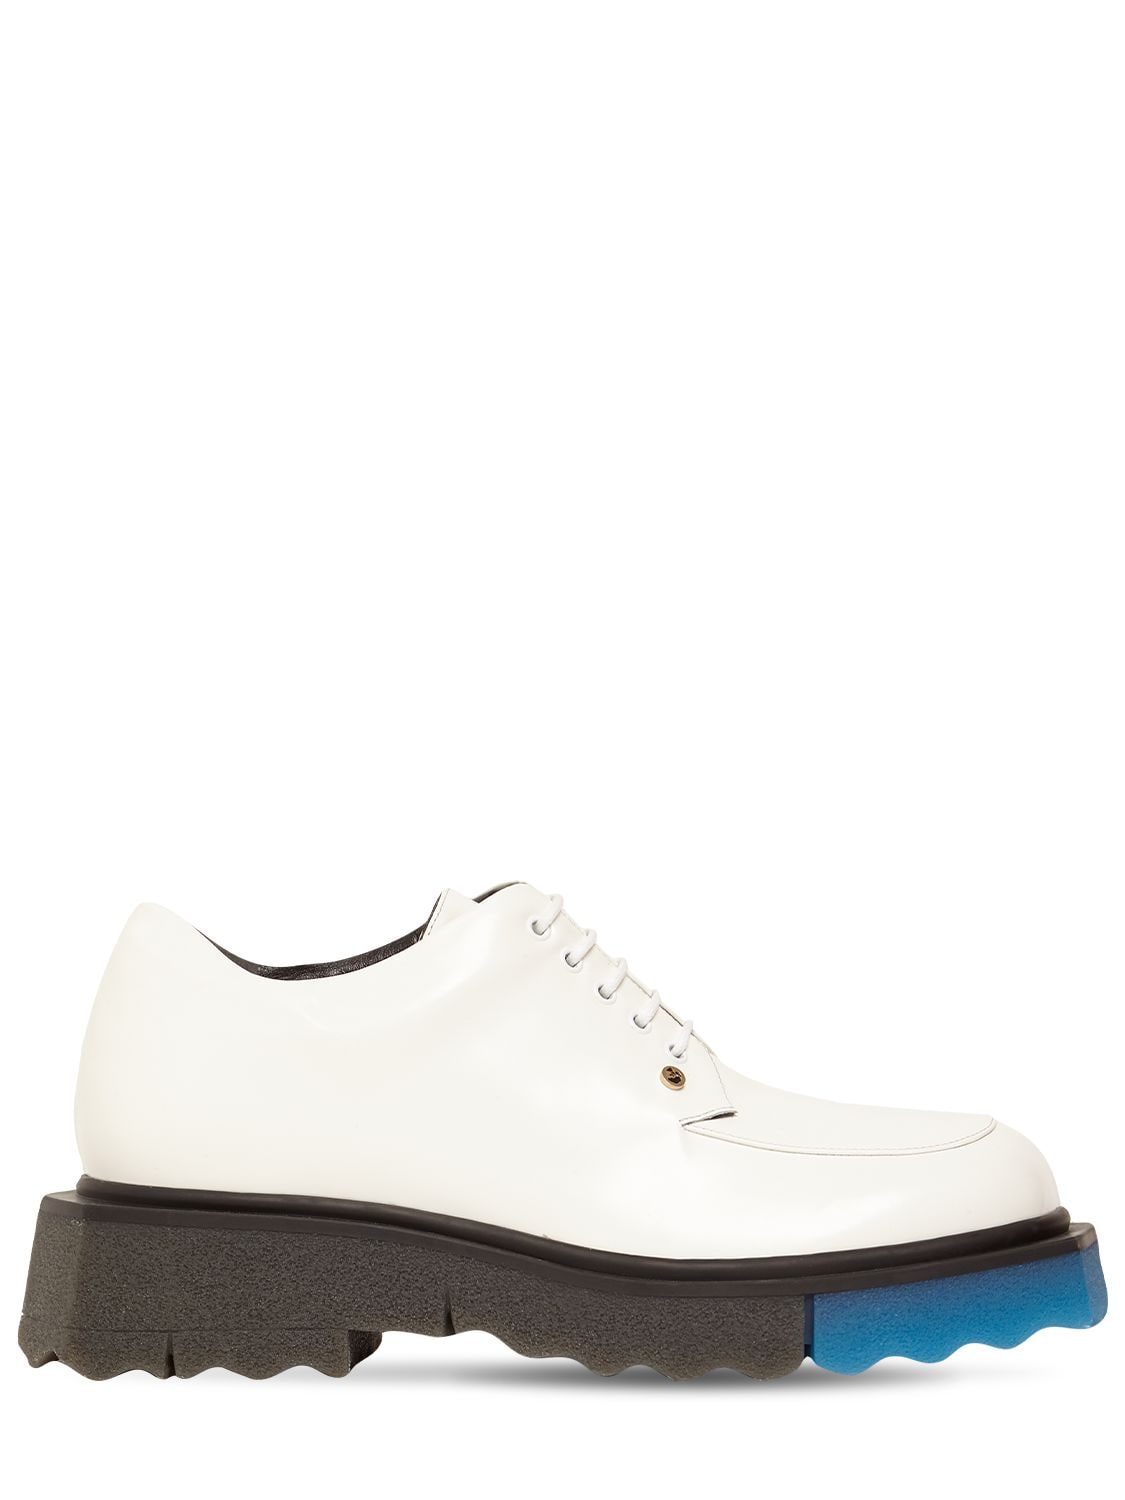 OFF-WHITE 40MM BRUSHED LEATHER LACE-UP SHOES,74ILOF004-MDEWMA2